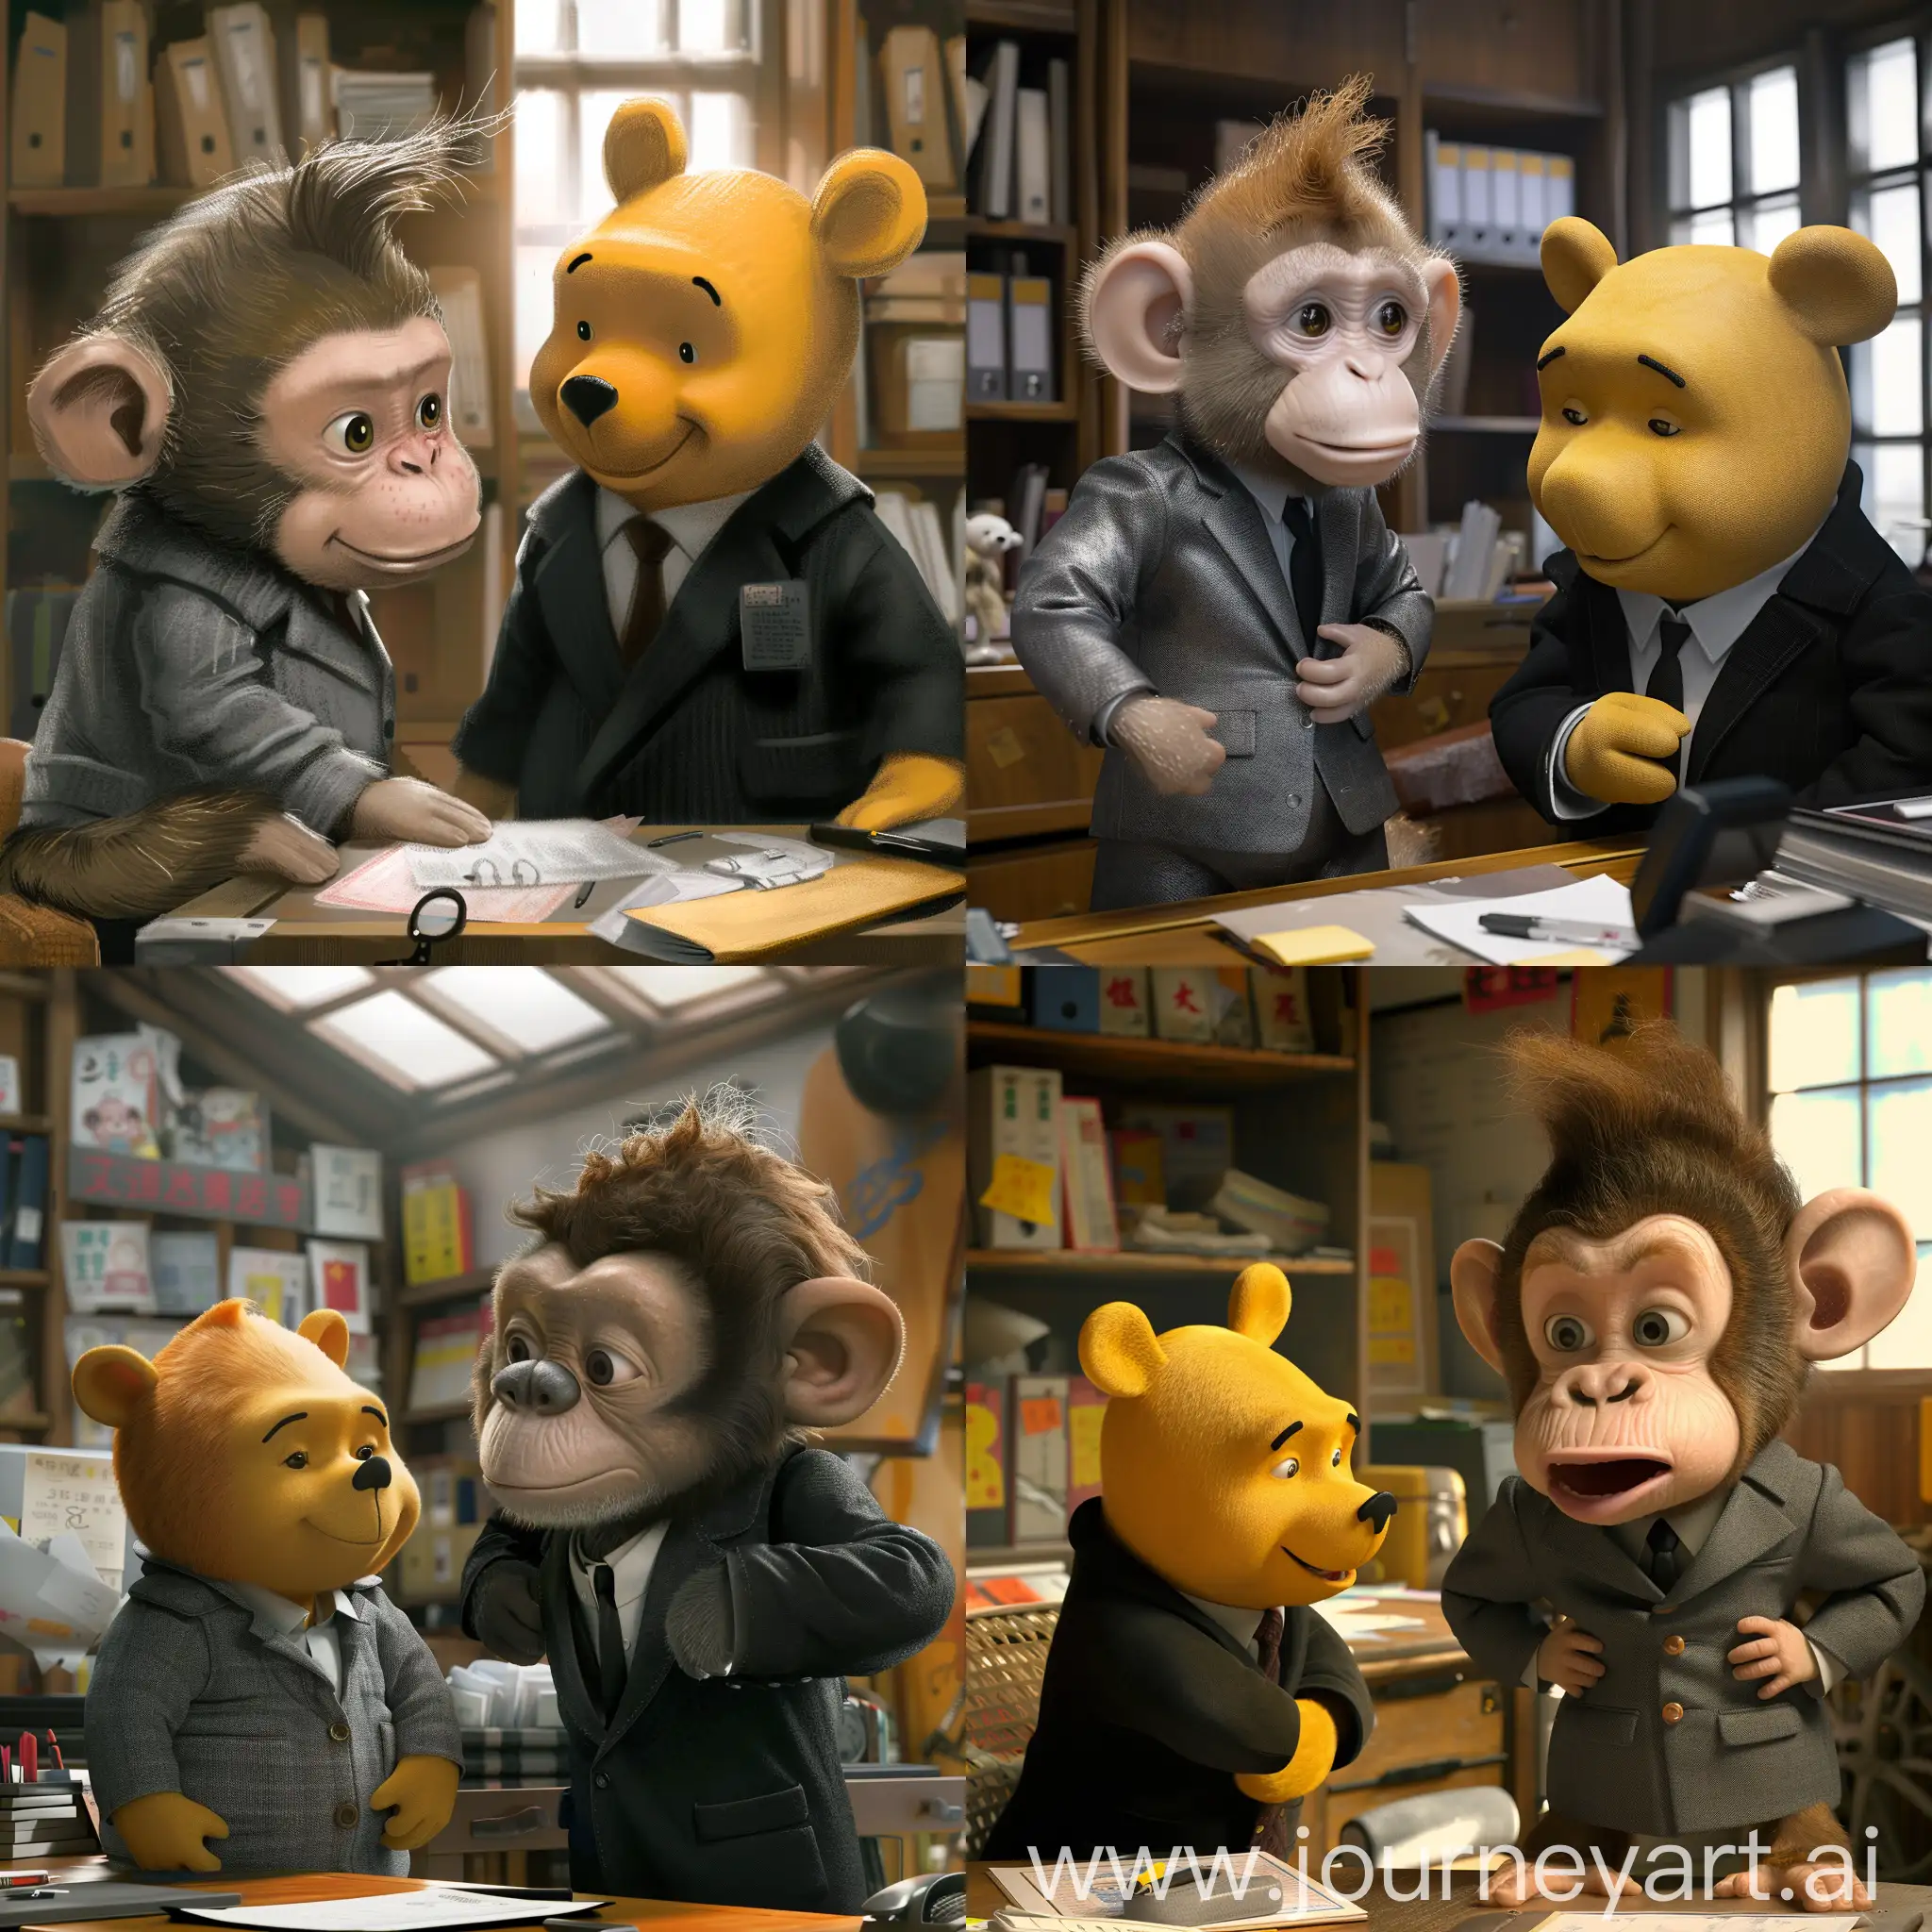 Office-Monkey-Collaborating-with-Winnie-the-Pooh-in-Gray-and-Black-Suits